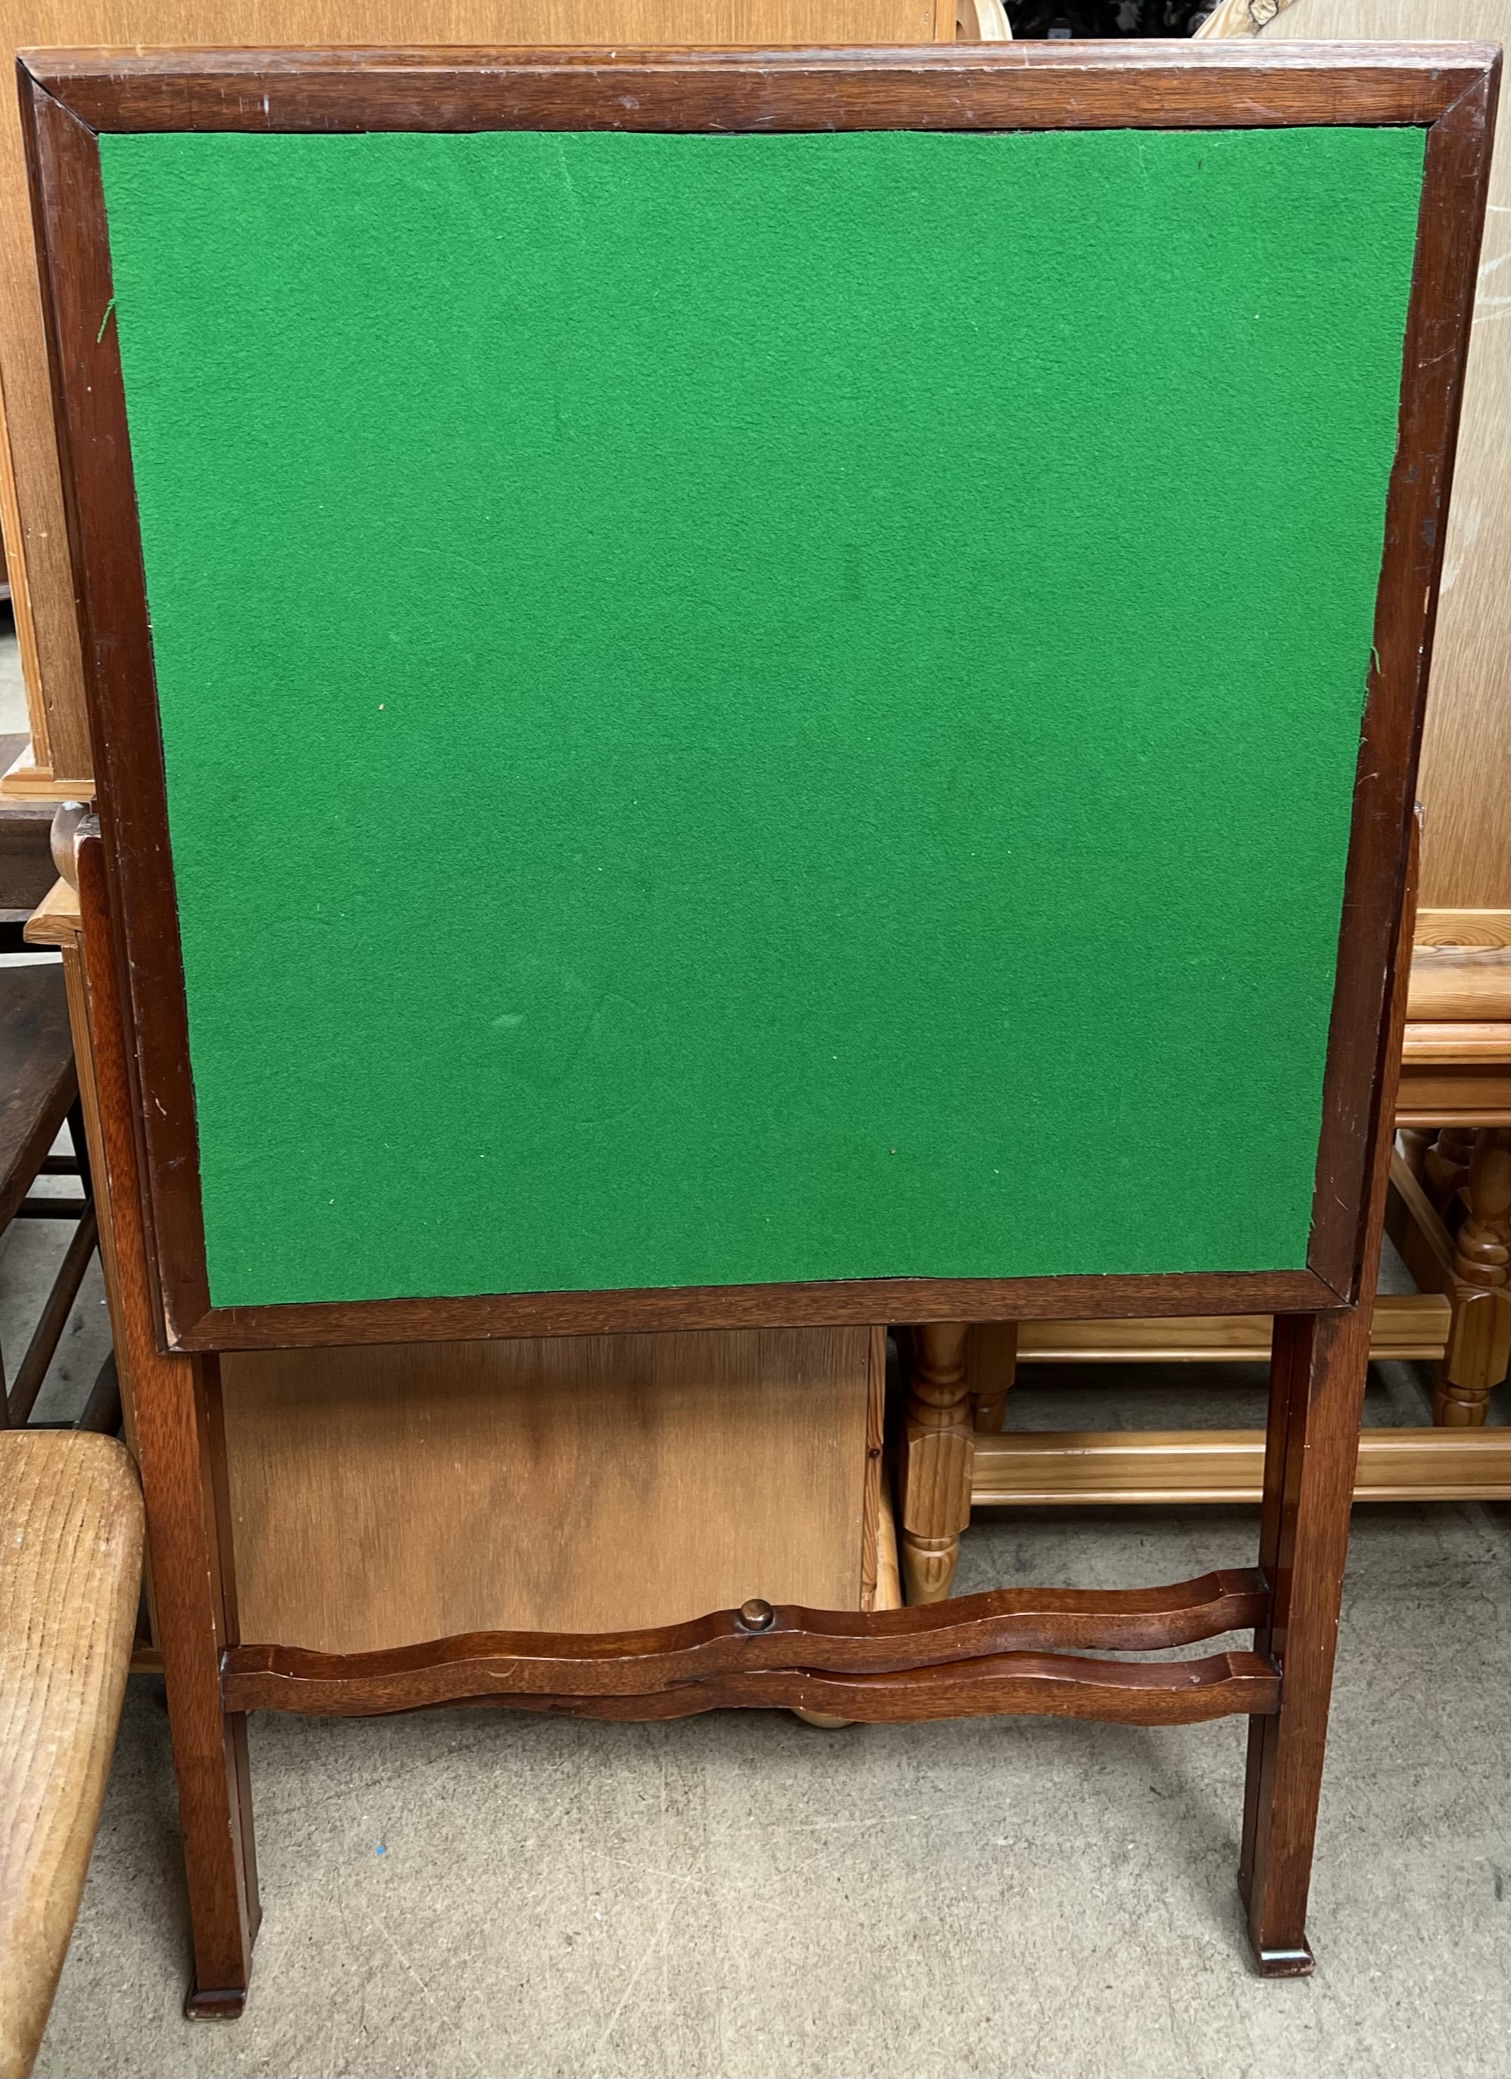 A folding card table with a square baize top